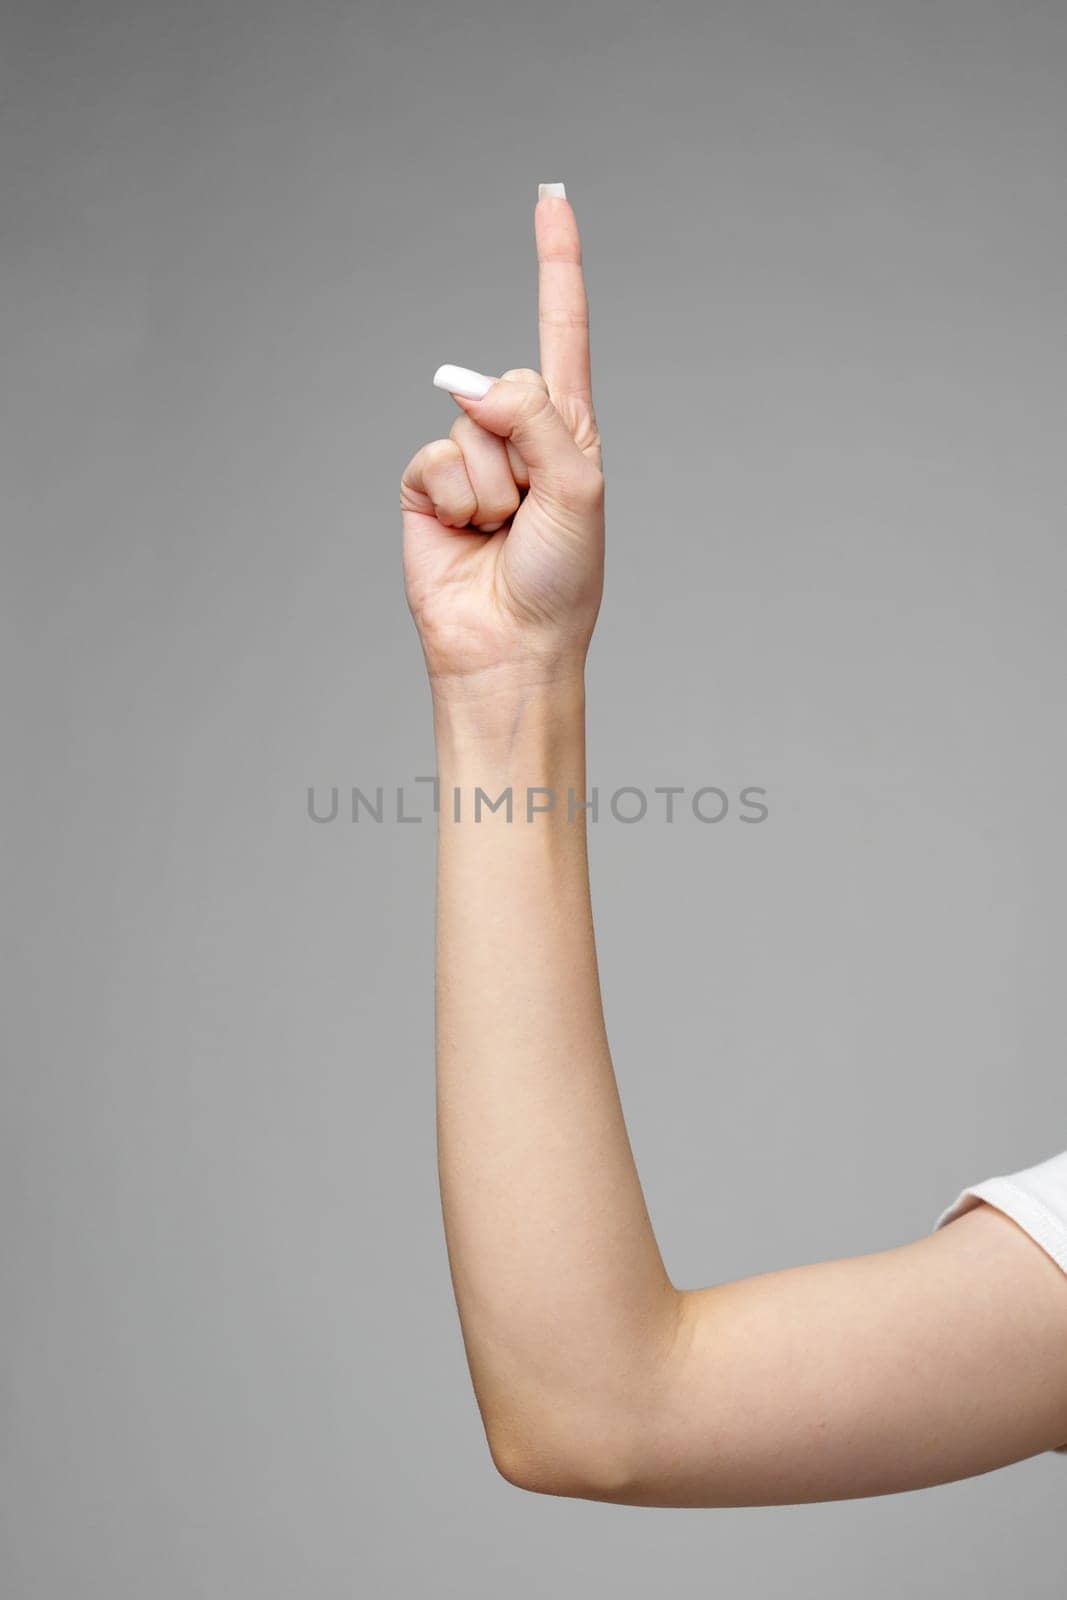 Female hand gesturing sign against gray background close up